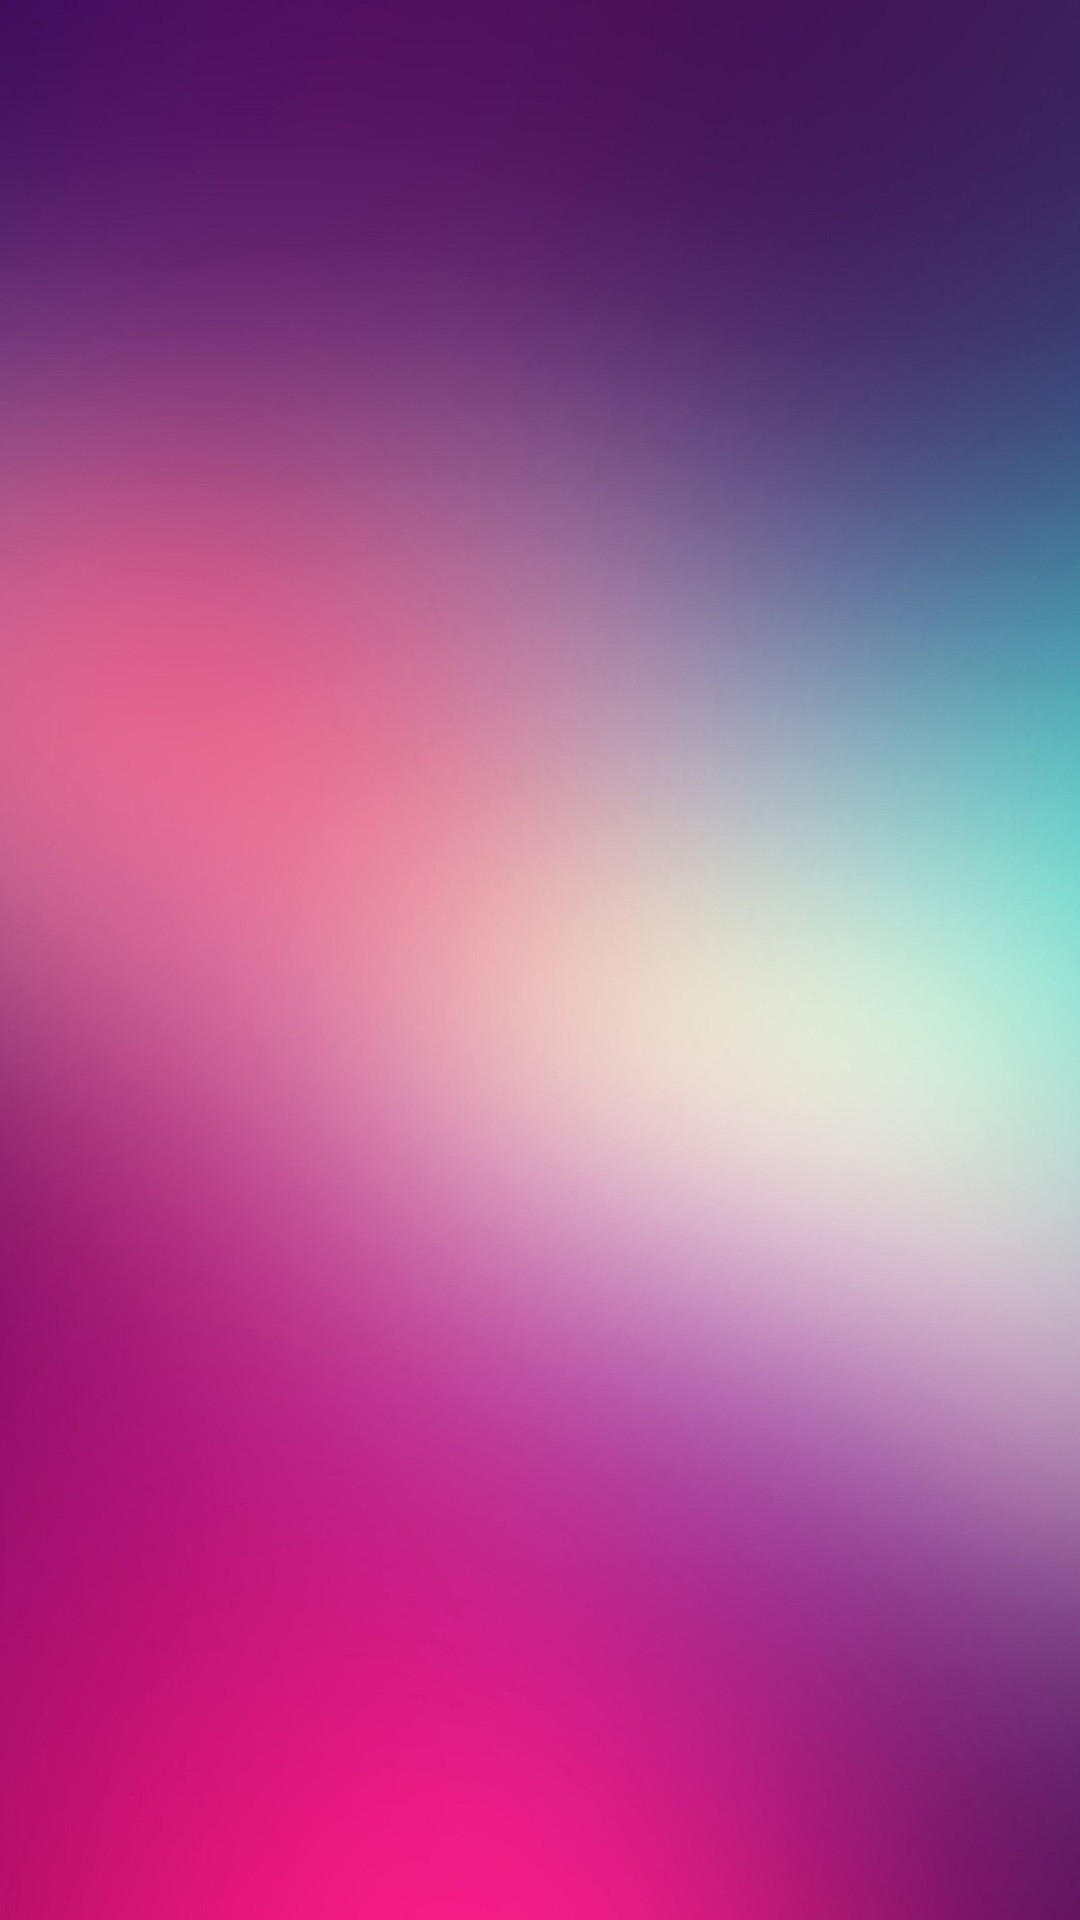 The Pink And Blue Background HD Samsung Galaxy S4 Wallpaper